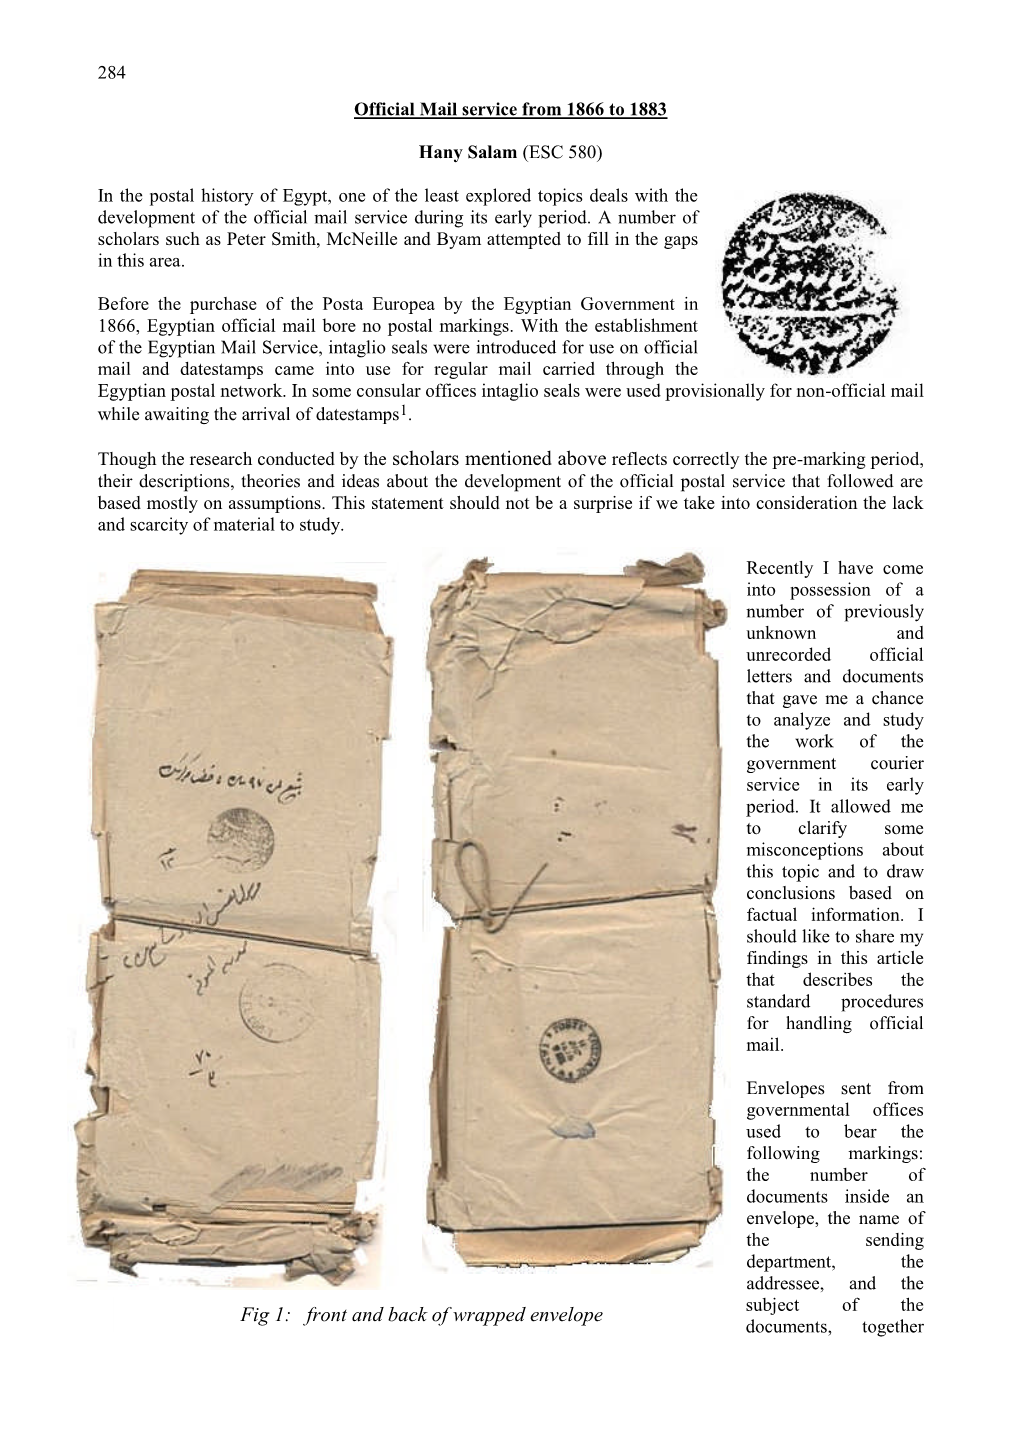 Fig 1: Front and Back of Wrapped Envelope Subject of the Documents, Together 285 with Its Archival Index